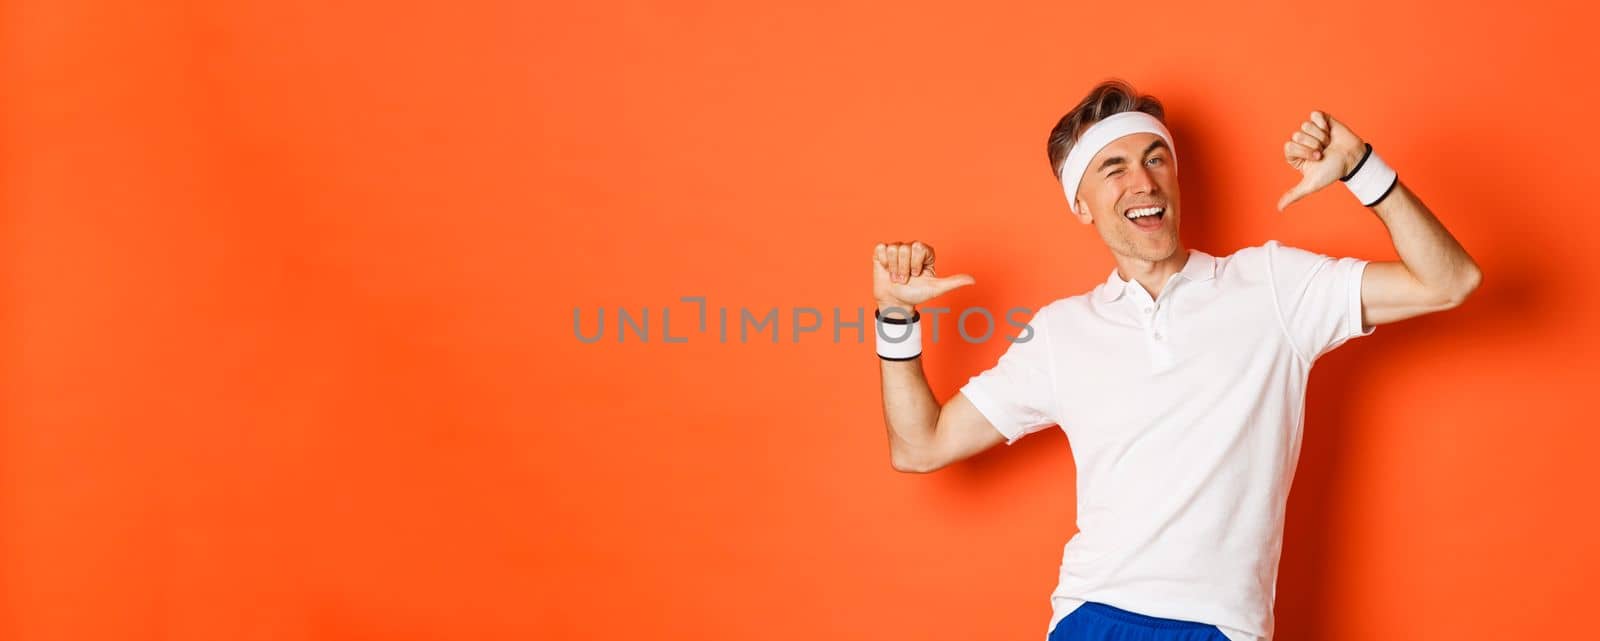 Concept of sport, fitness and lifestyle. Image of confident middle-aged man pointing at himself, bragging about achievement, wearing clothes for workout, standing over orange background by Benzoix